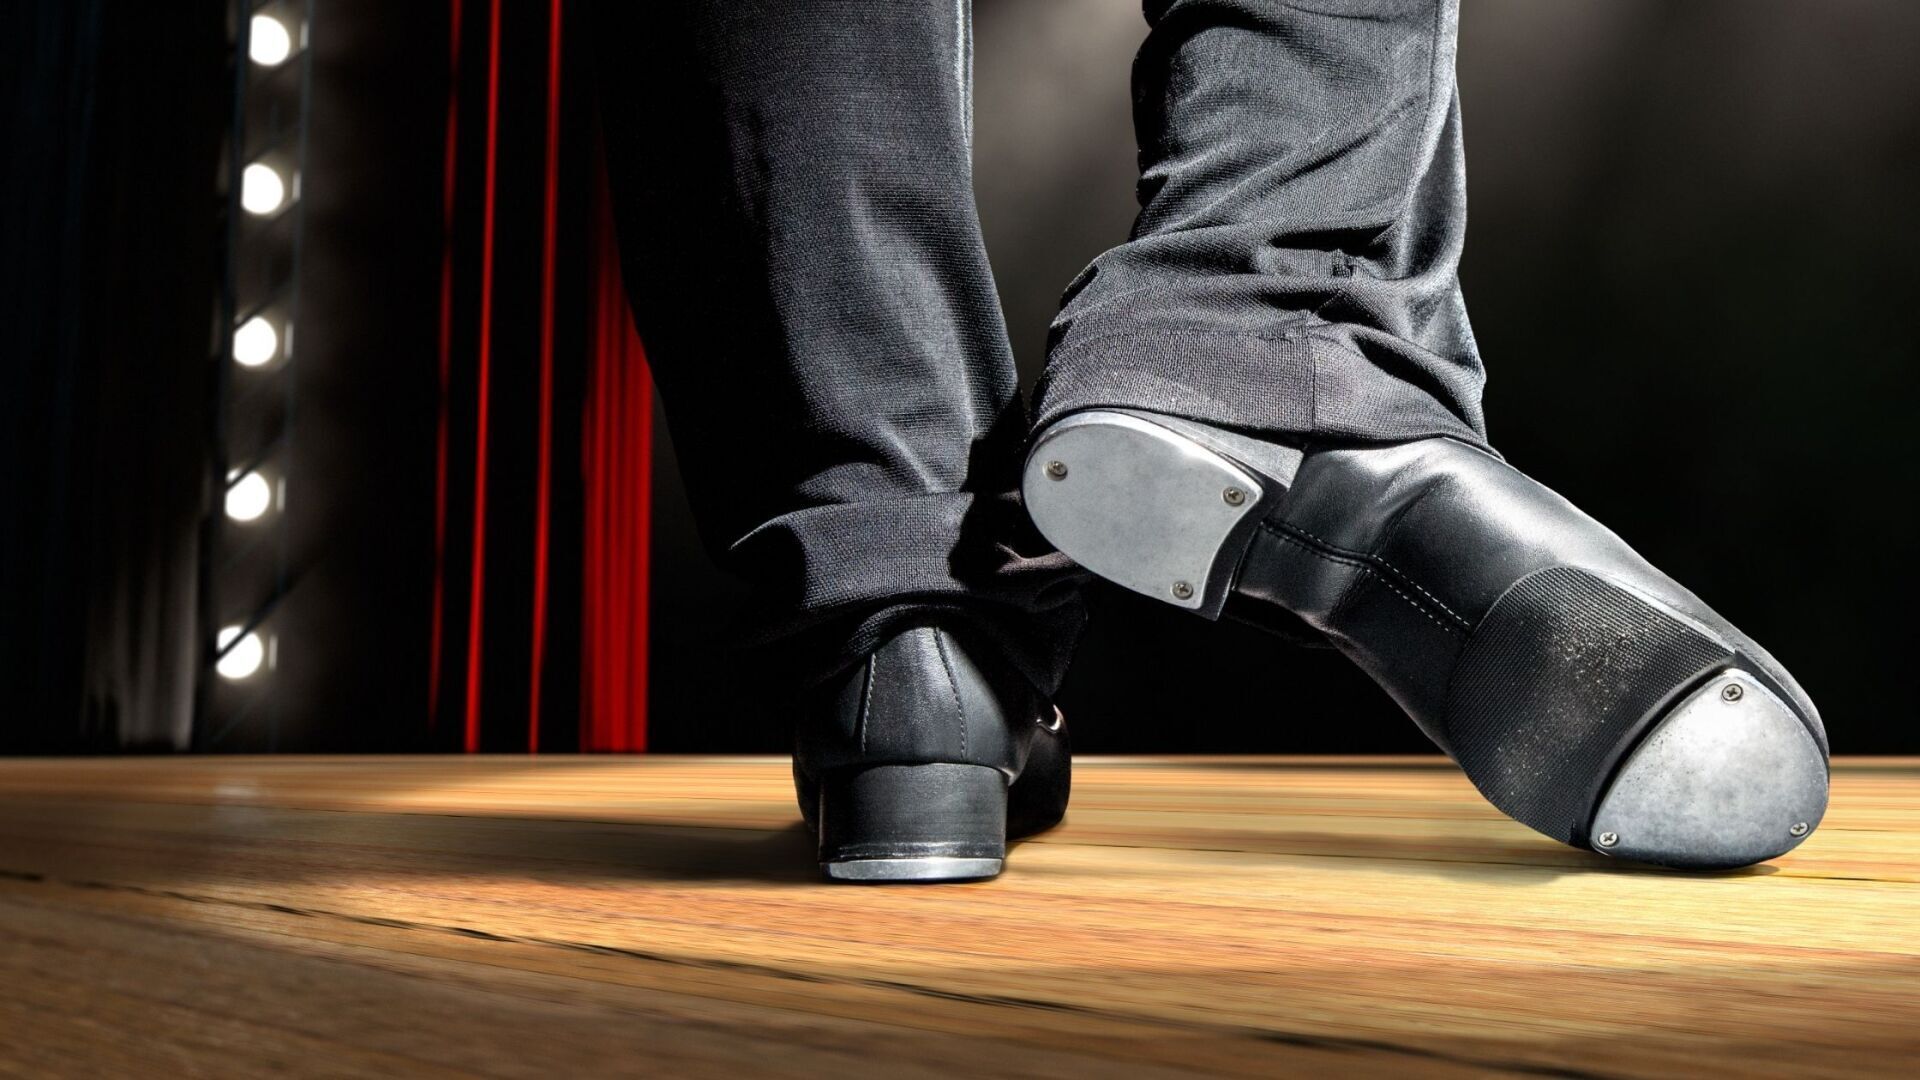 Tap dancing {humour} the common types of taps